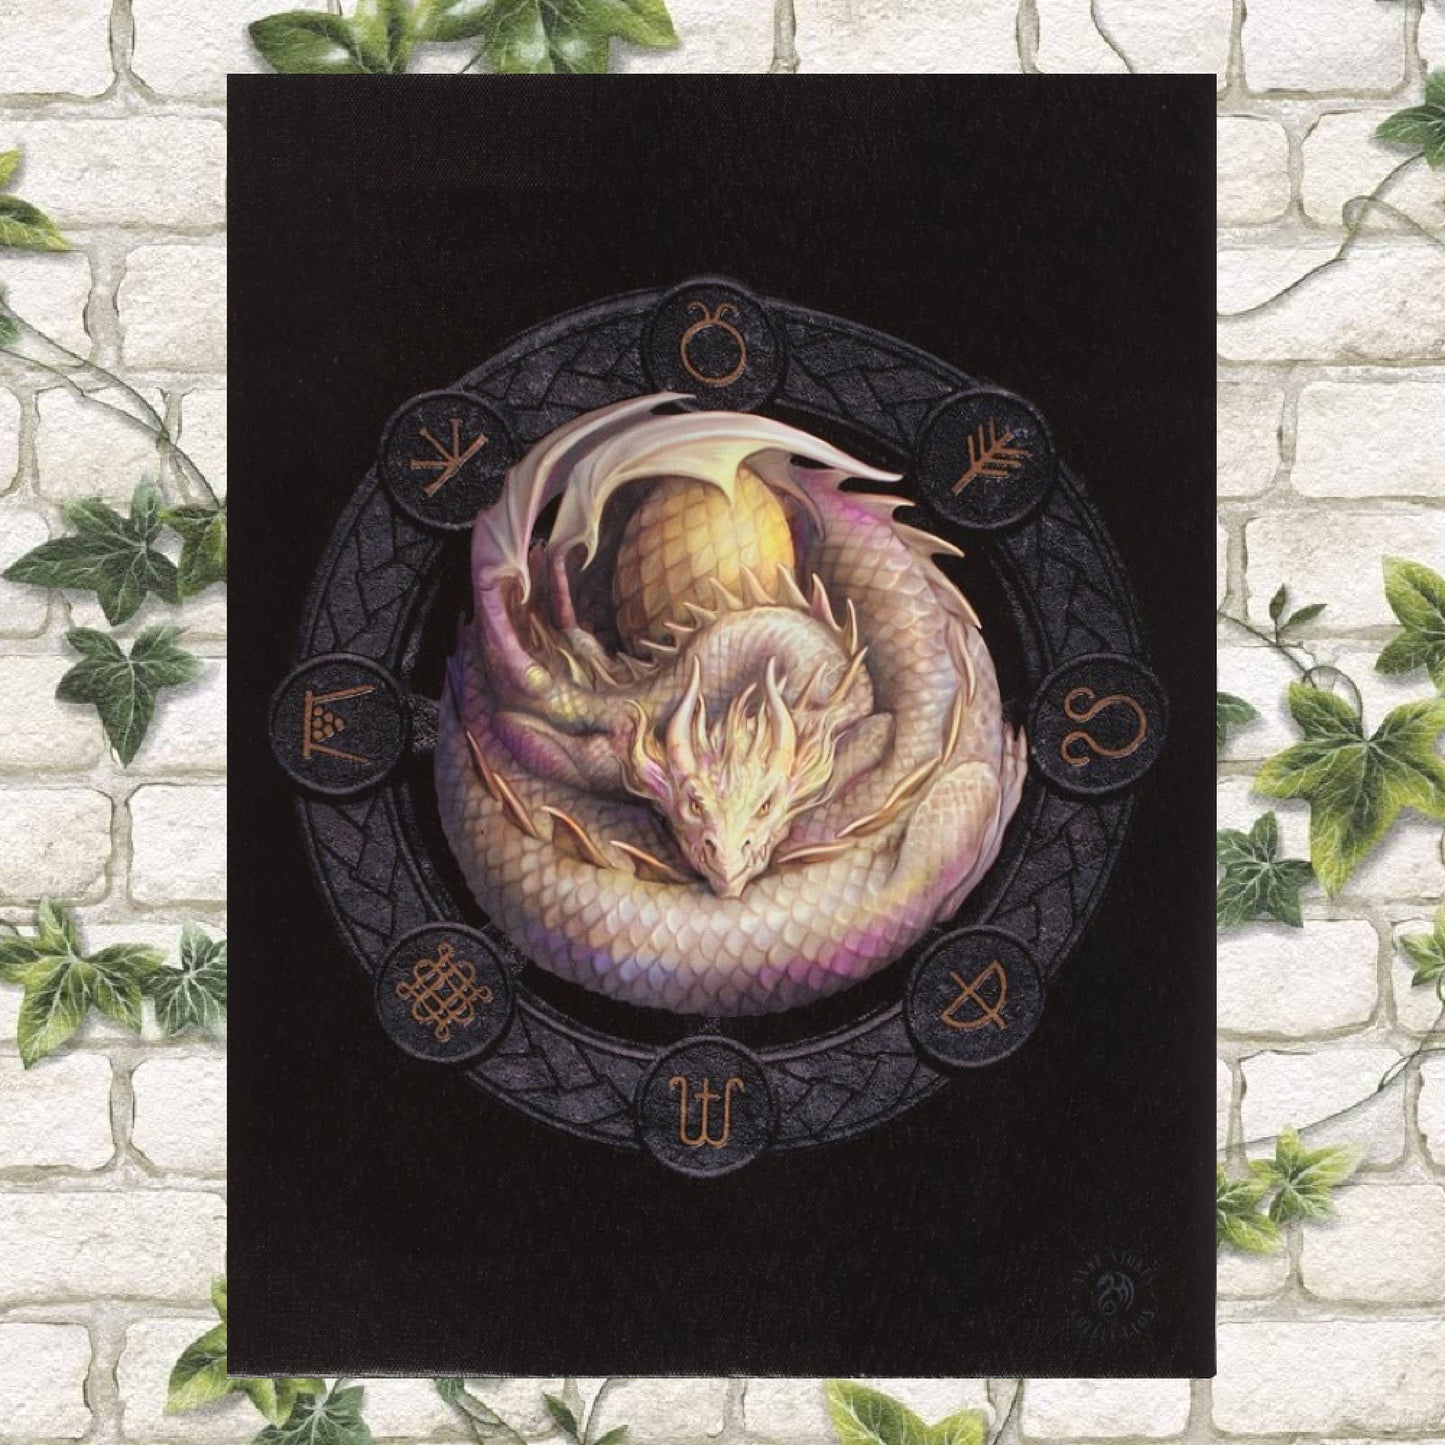 25cm x 19cm canvas wall plaque featuring a high quality, full colour print of the Ostara dragon artwork by fantasy artist Anne Stokes. Part of the Dragons of the Sabbats art series